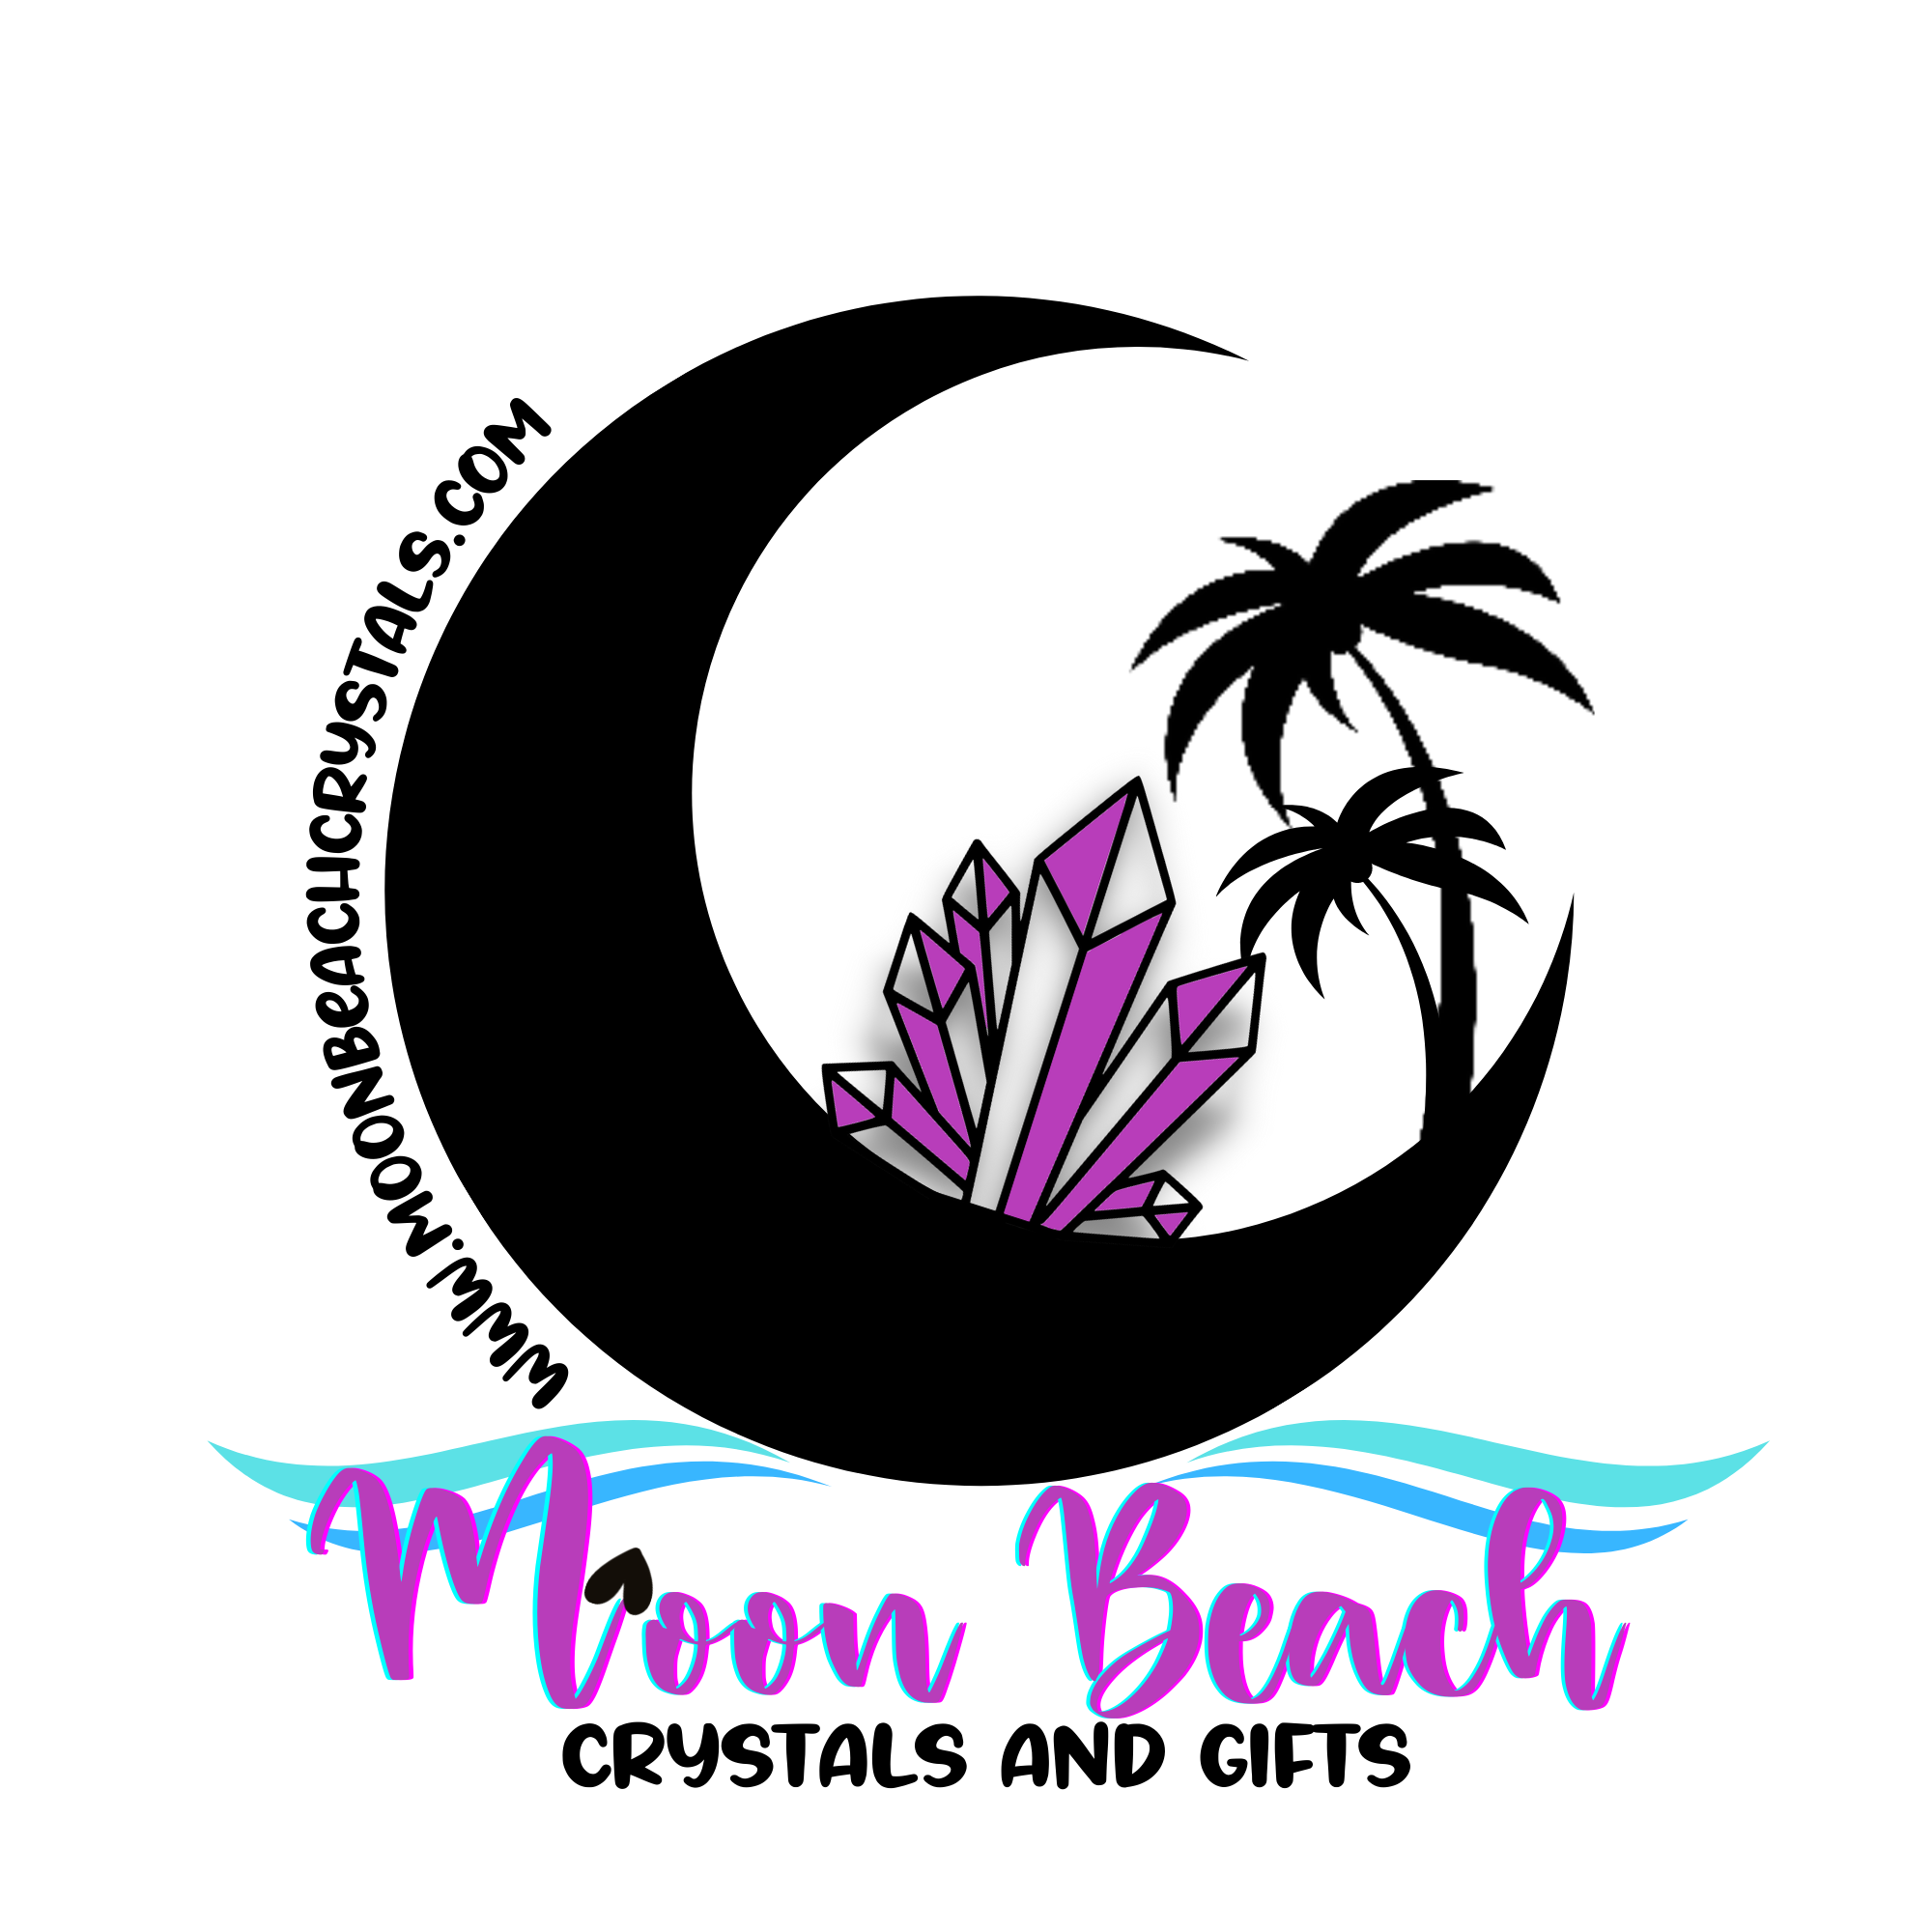 Moon Beach Crystals And Gifts